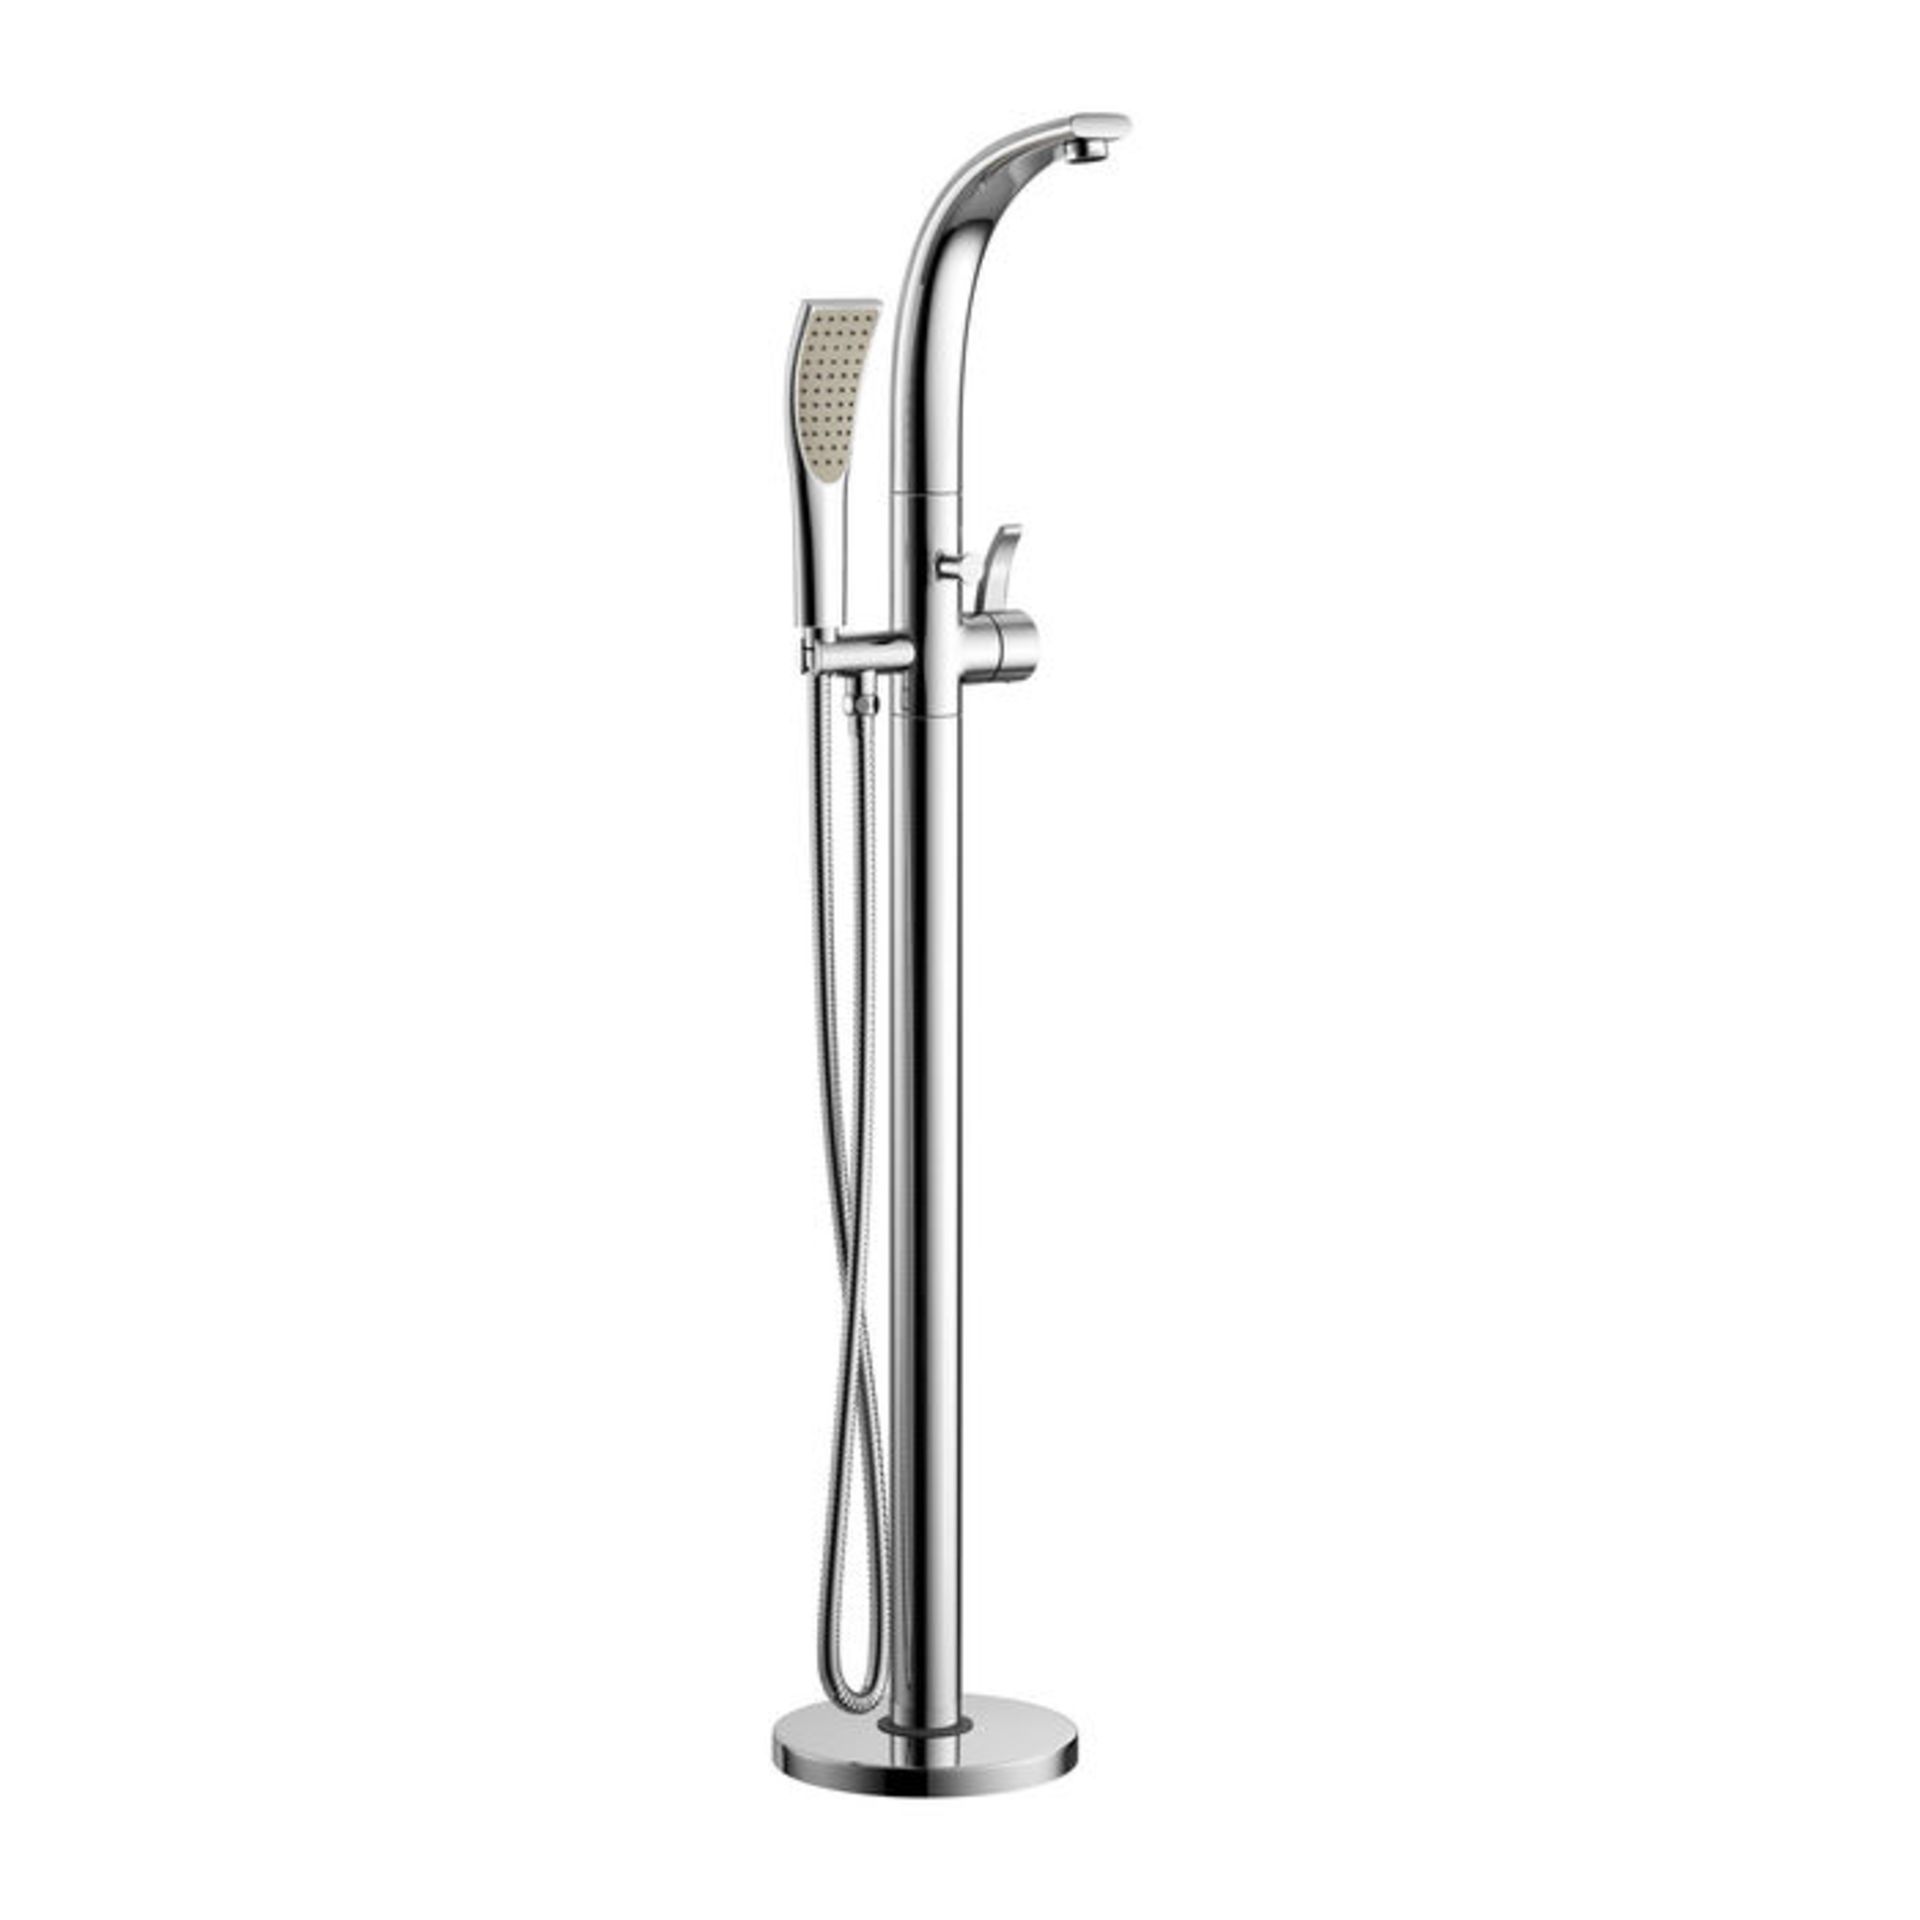 (ZZ73) Ava Freestanding Bath Mixer Tap with Hand Held Shower Head We love this because it has a - Image 2 of 2